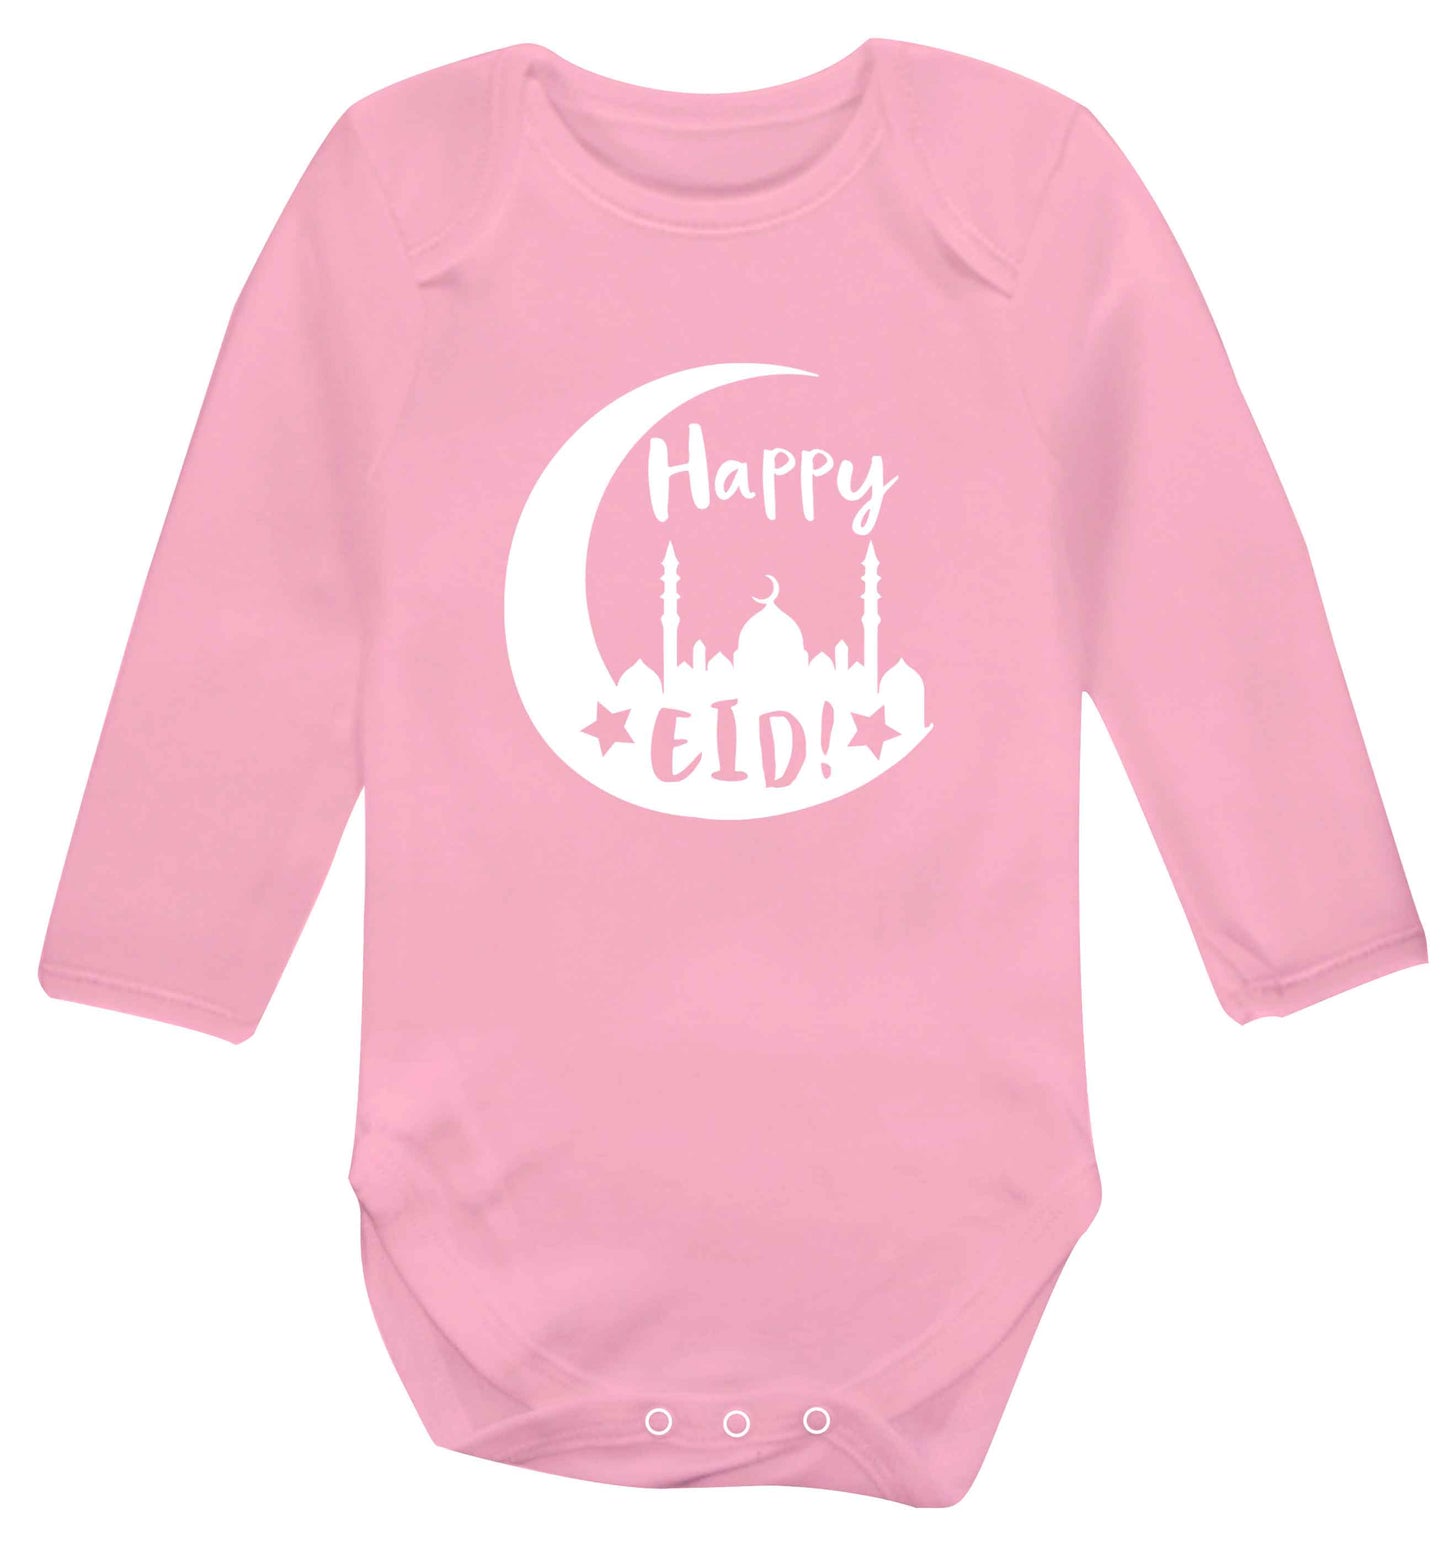 Happy Eid baby vest long sleeved pale pink 6-12 months